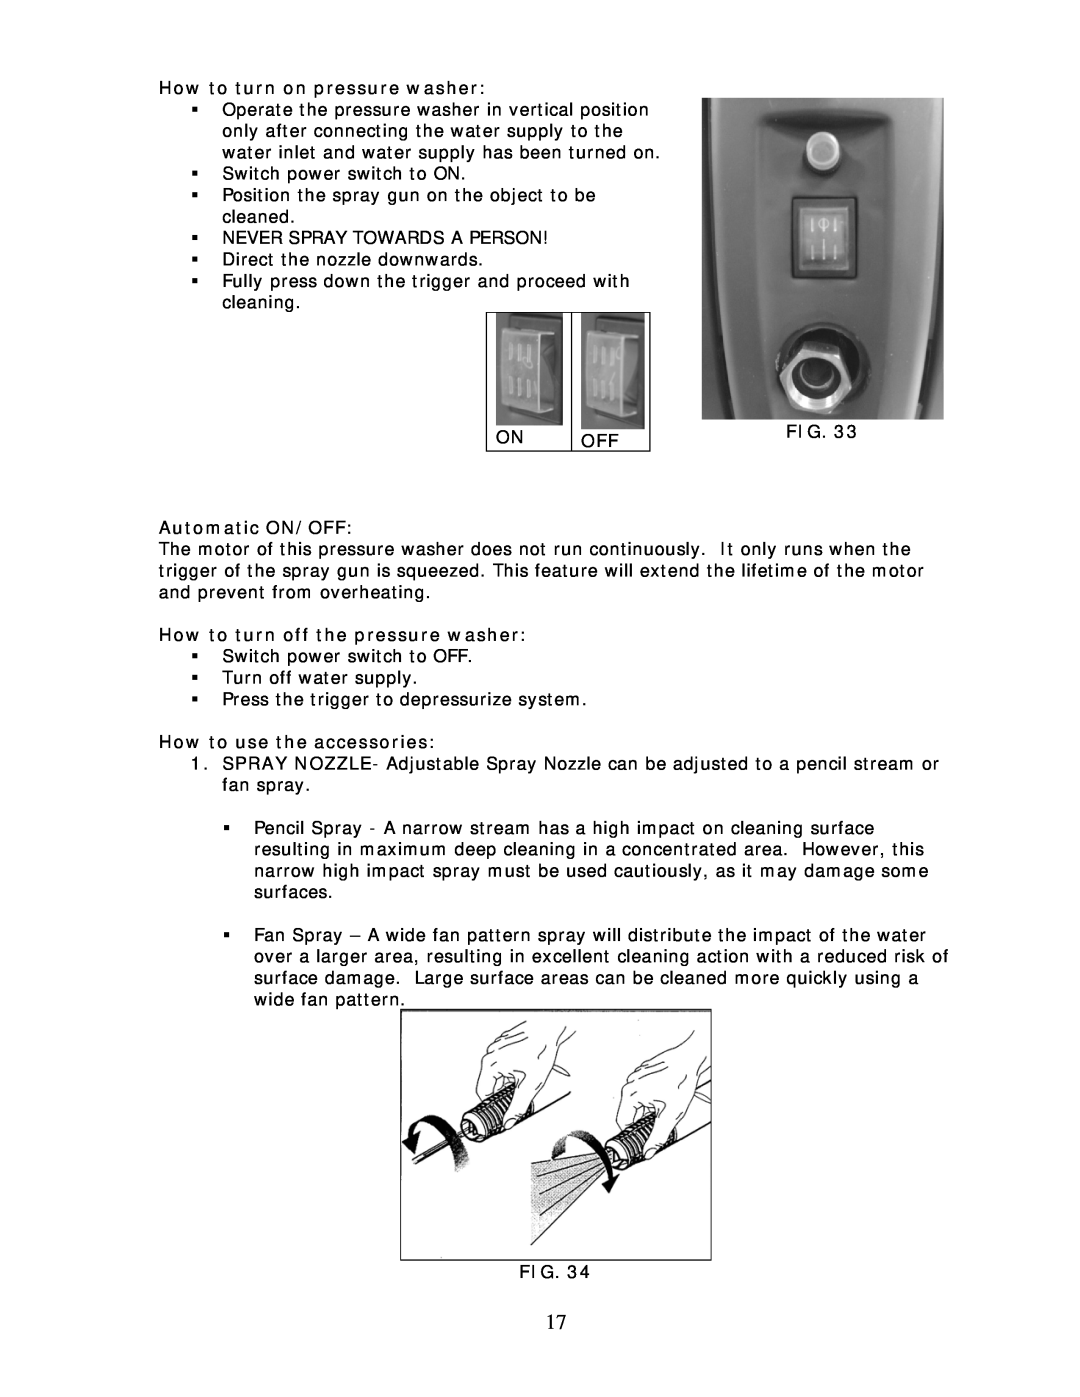 Wachsmuth & Krogmann QL-3100B manual How to turn on pressure washer, Automatic ON/OFF, How to turn off the pressure washer 